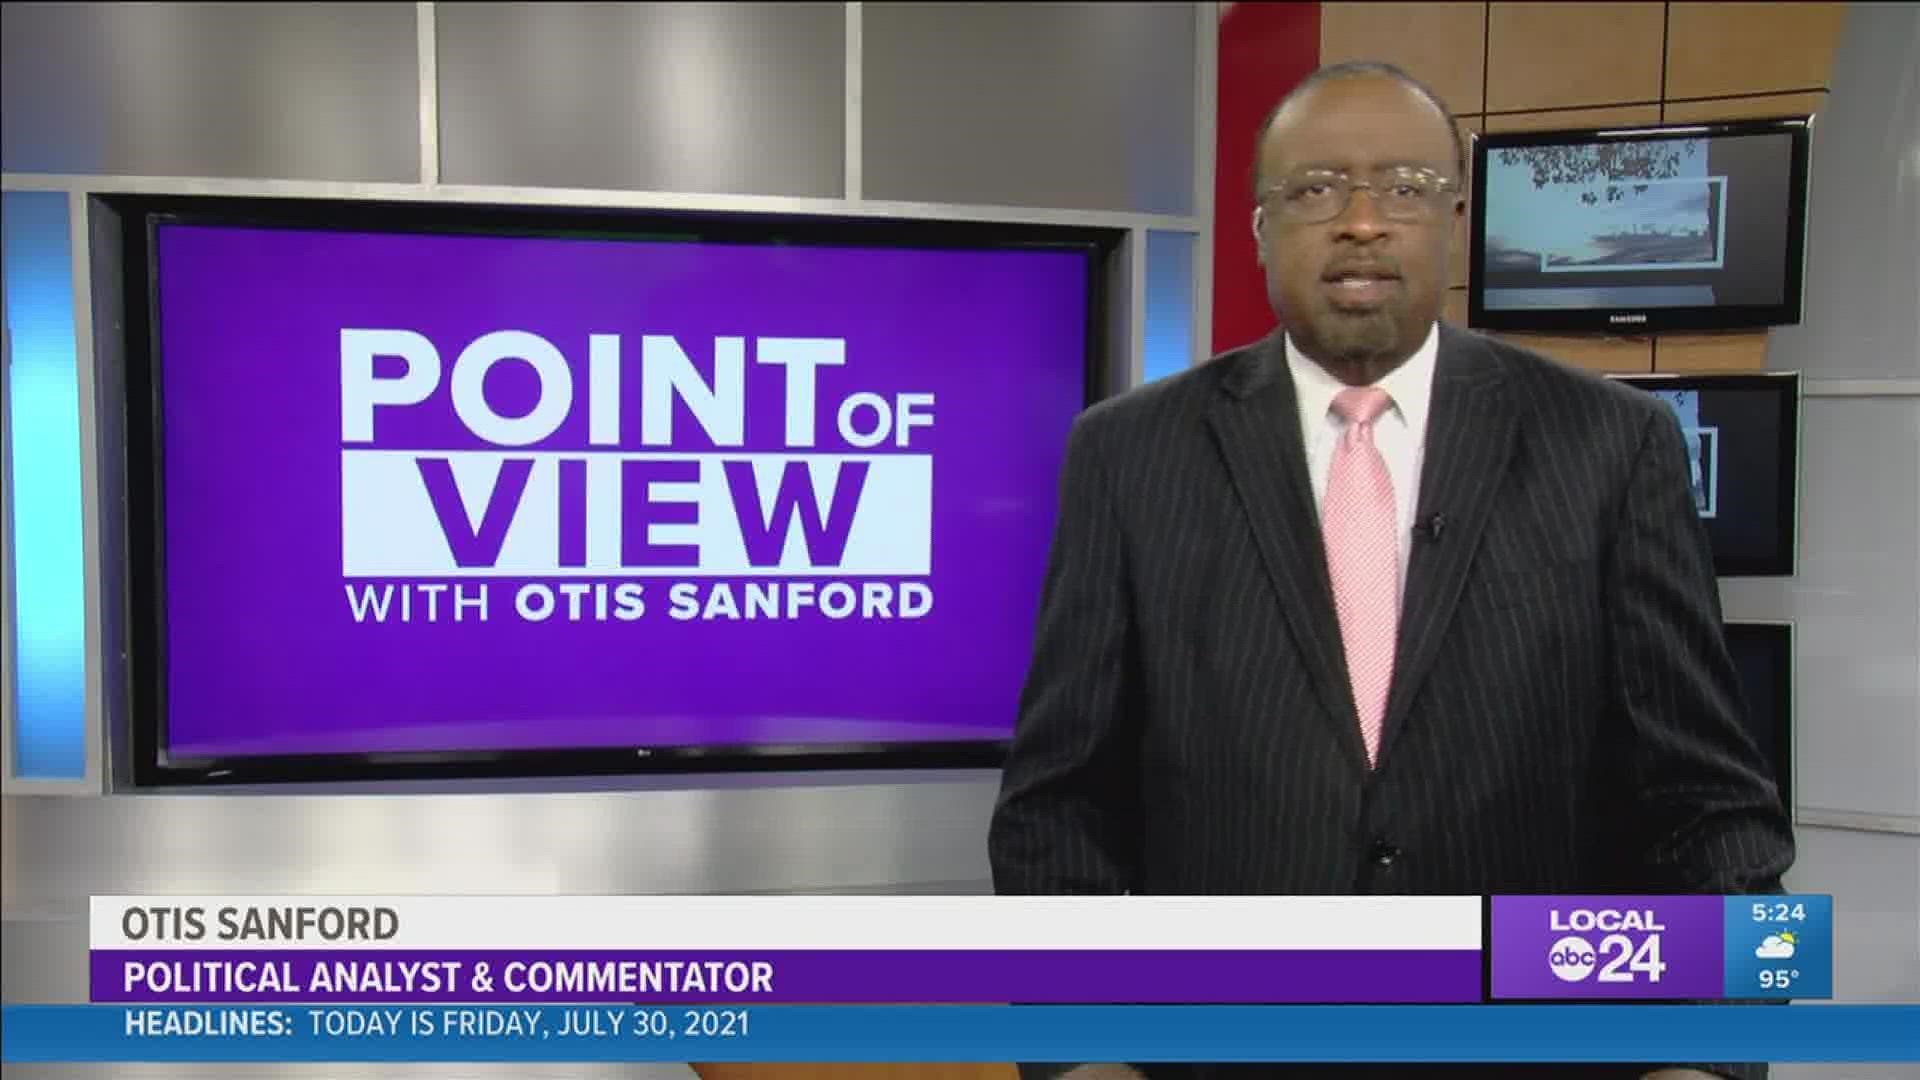 Political analyst and commentator Otis Sanford shared his point of view on the talks about consolidating Memphis and Shelby County government.